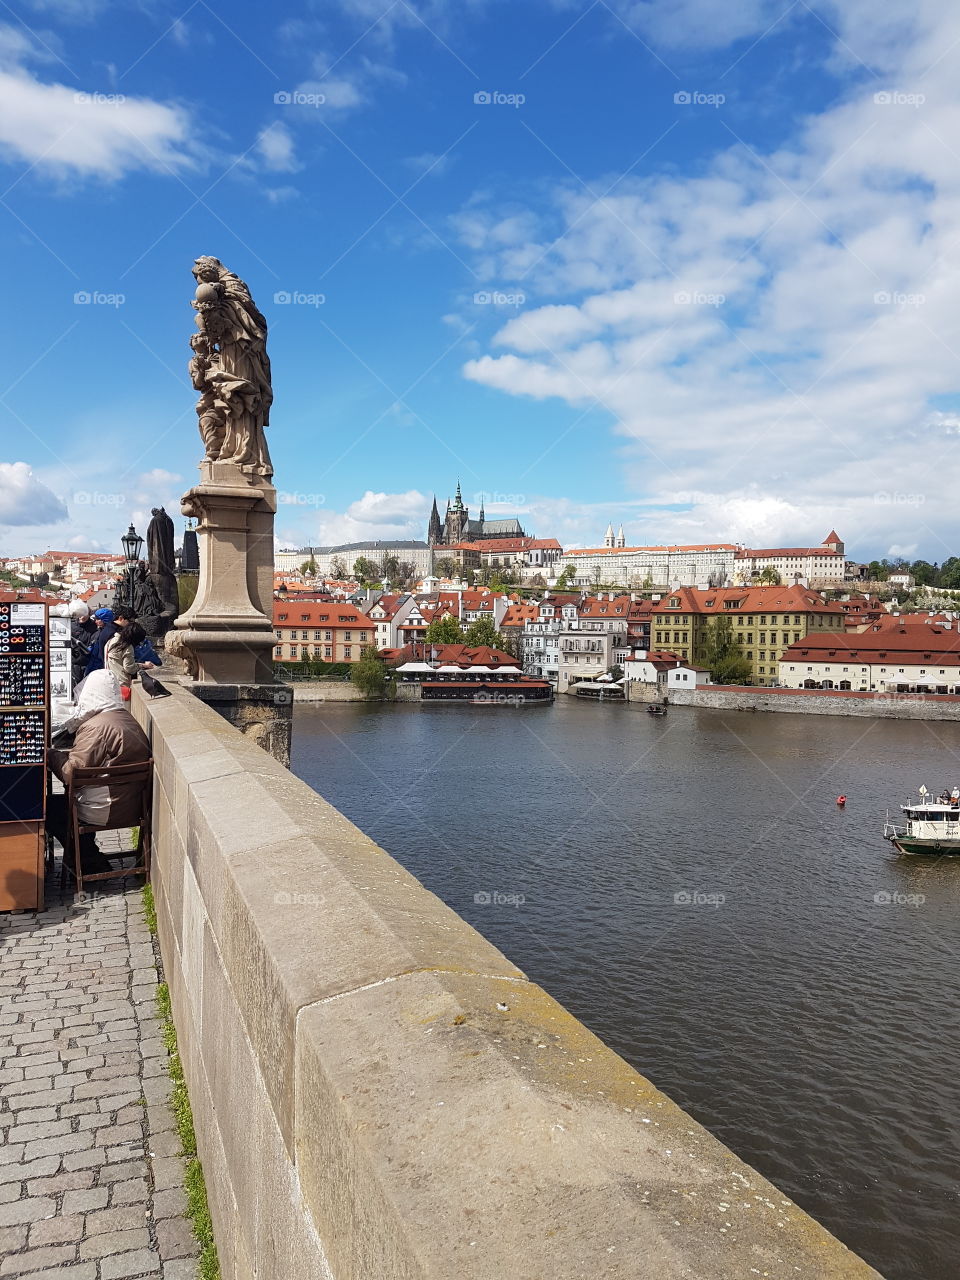 a view from Charles bridge. looking across the river and the castle, rising high from the horizon, in clear view